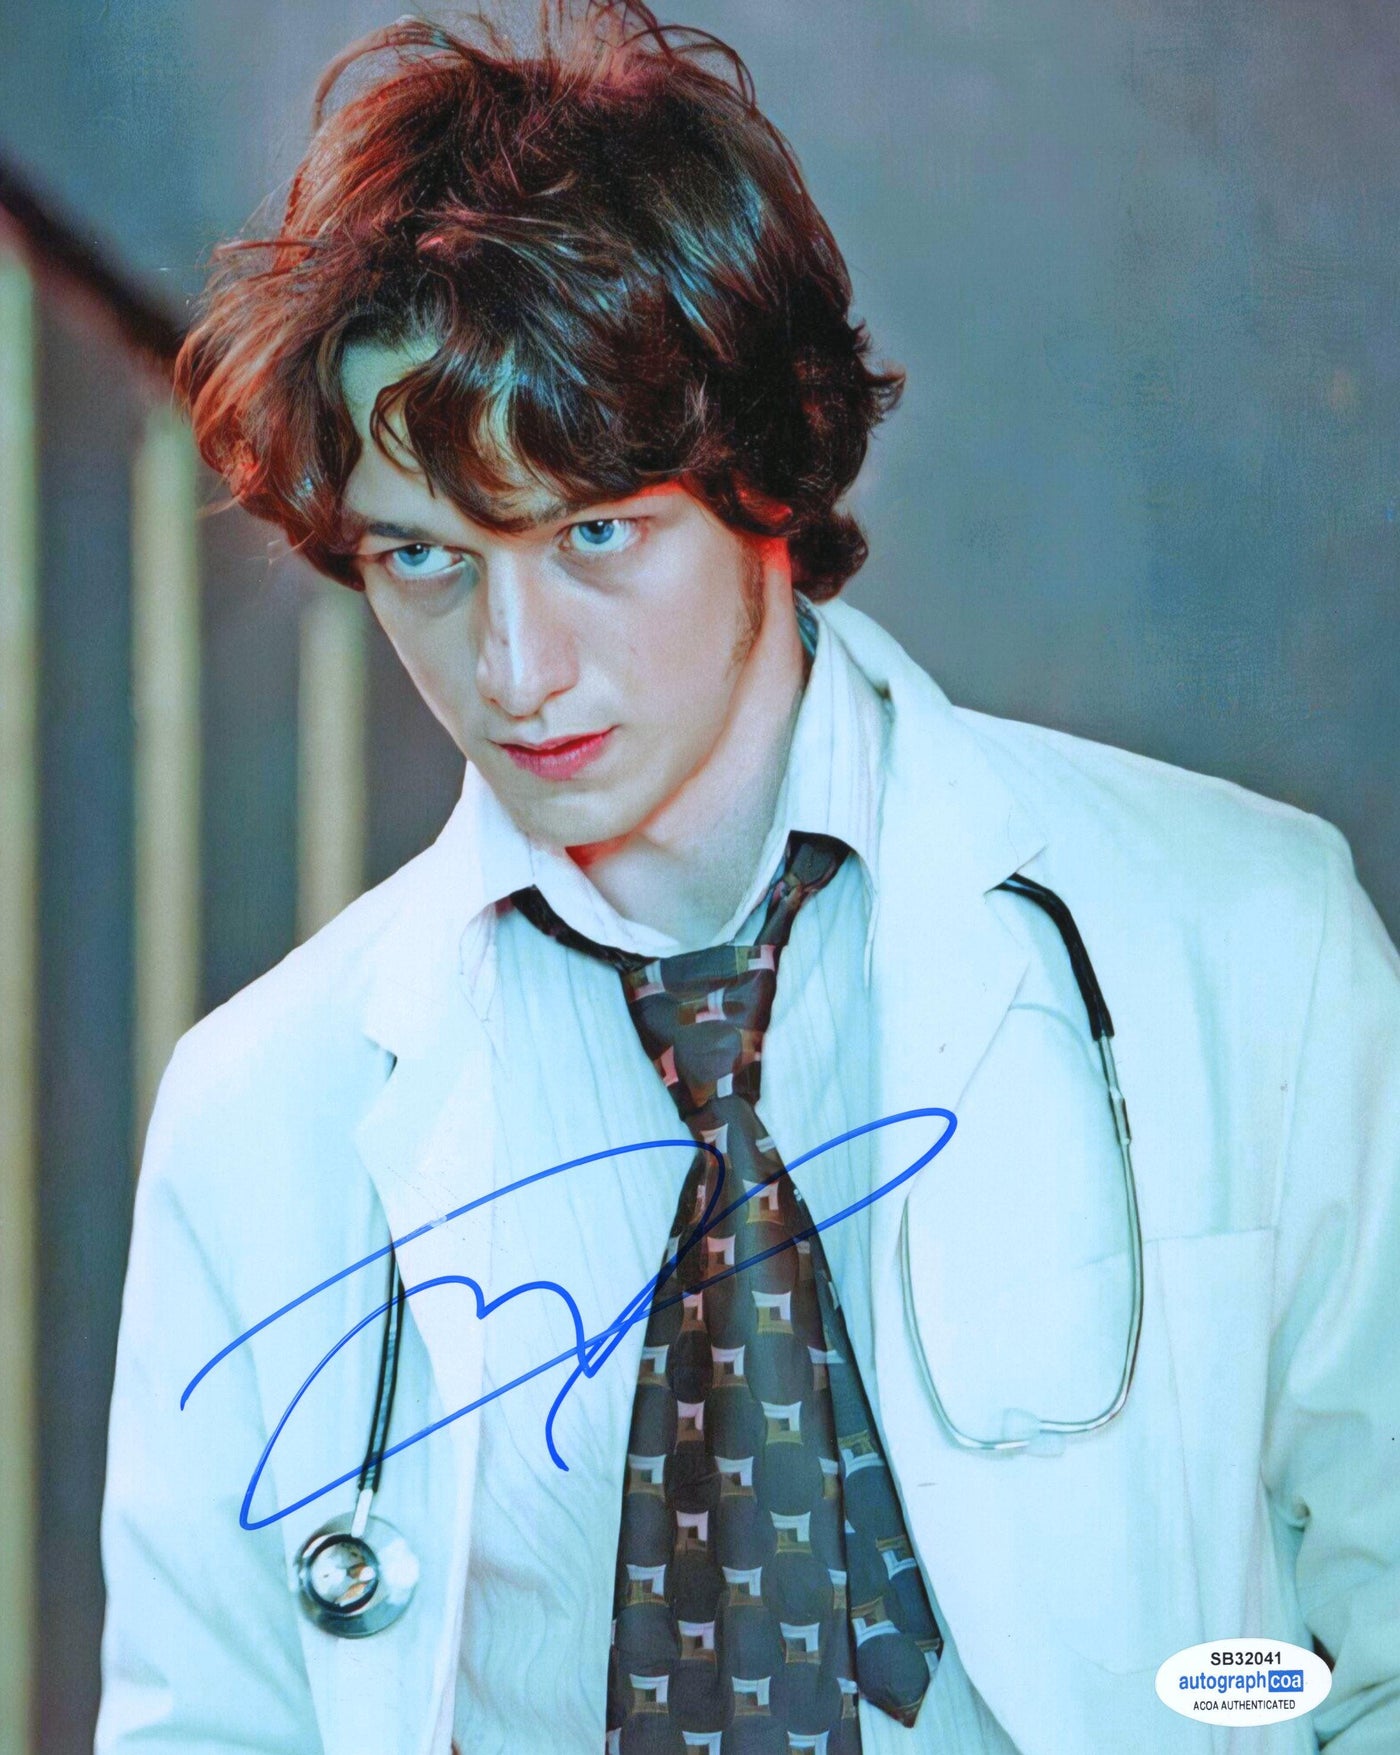 James McAvoy Signed 8x10 Photo The Last King of Scotland Autographed ACOA